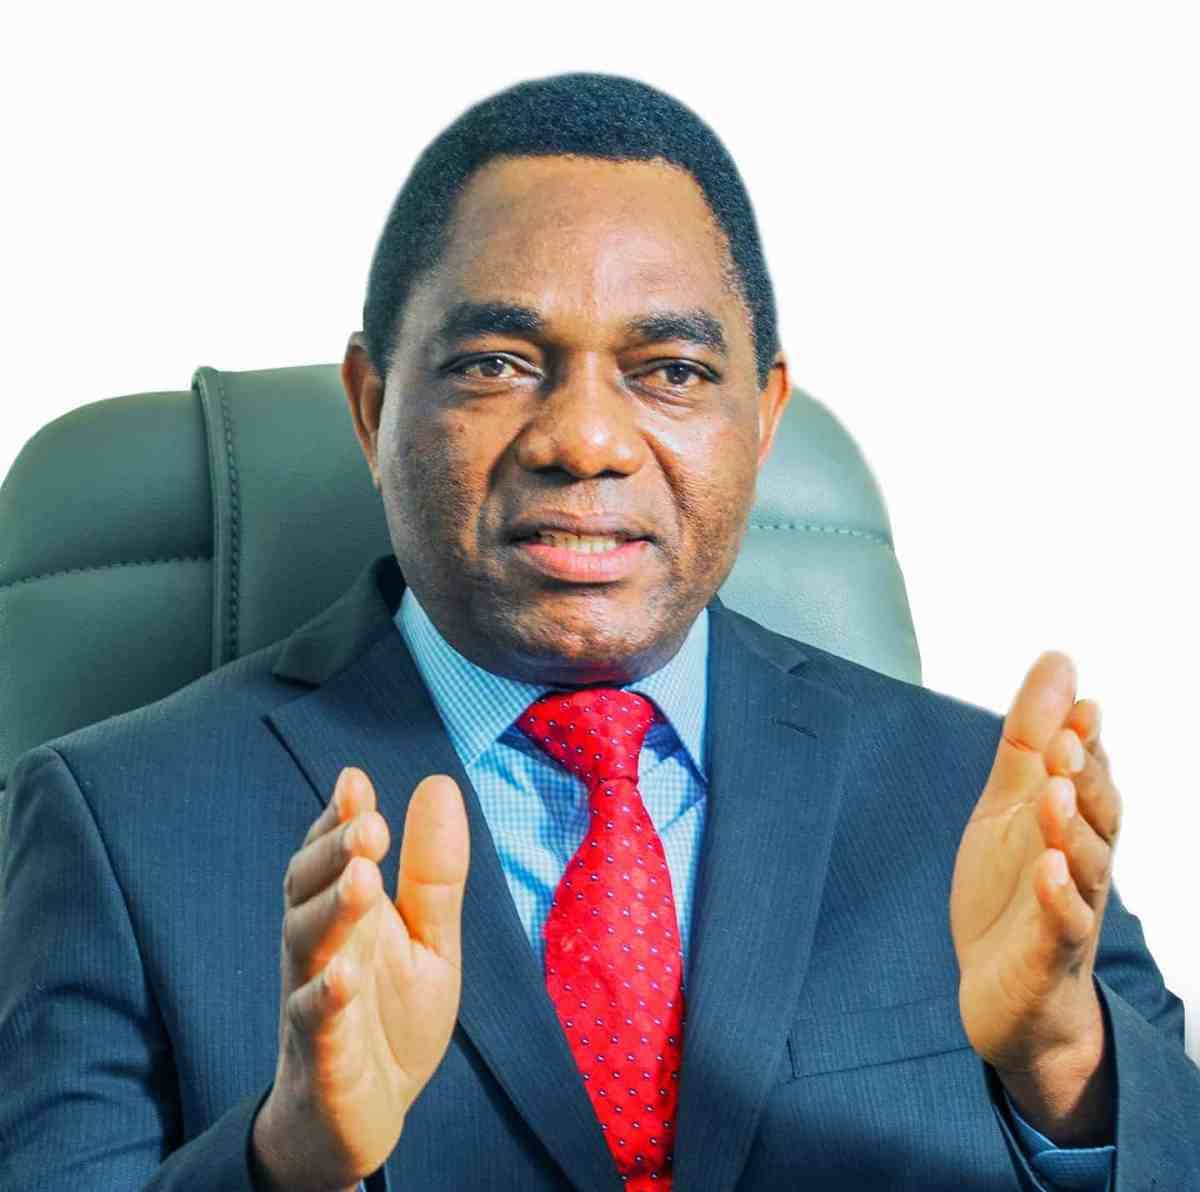 Zambian President Hichilema urges people seeking public office to work hard for their lives first | Zim News